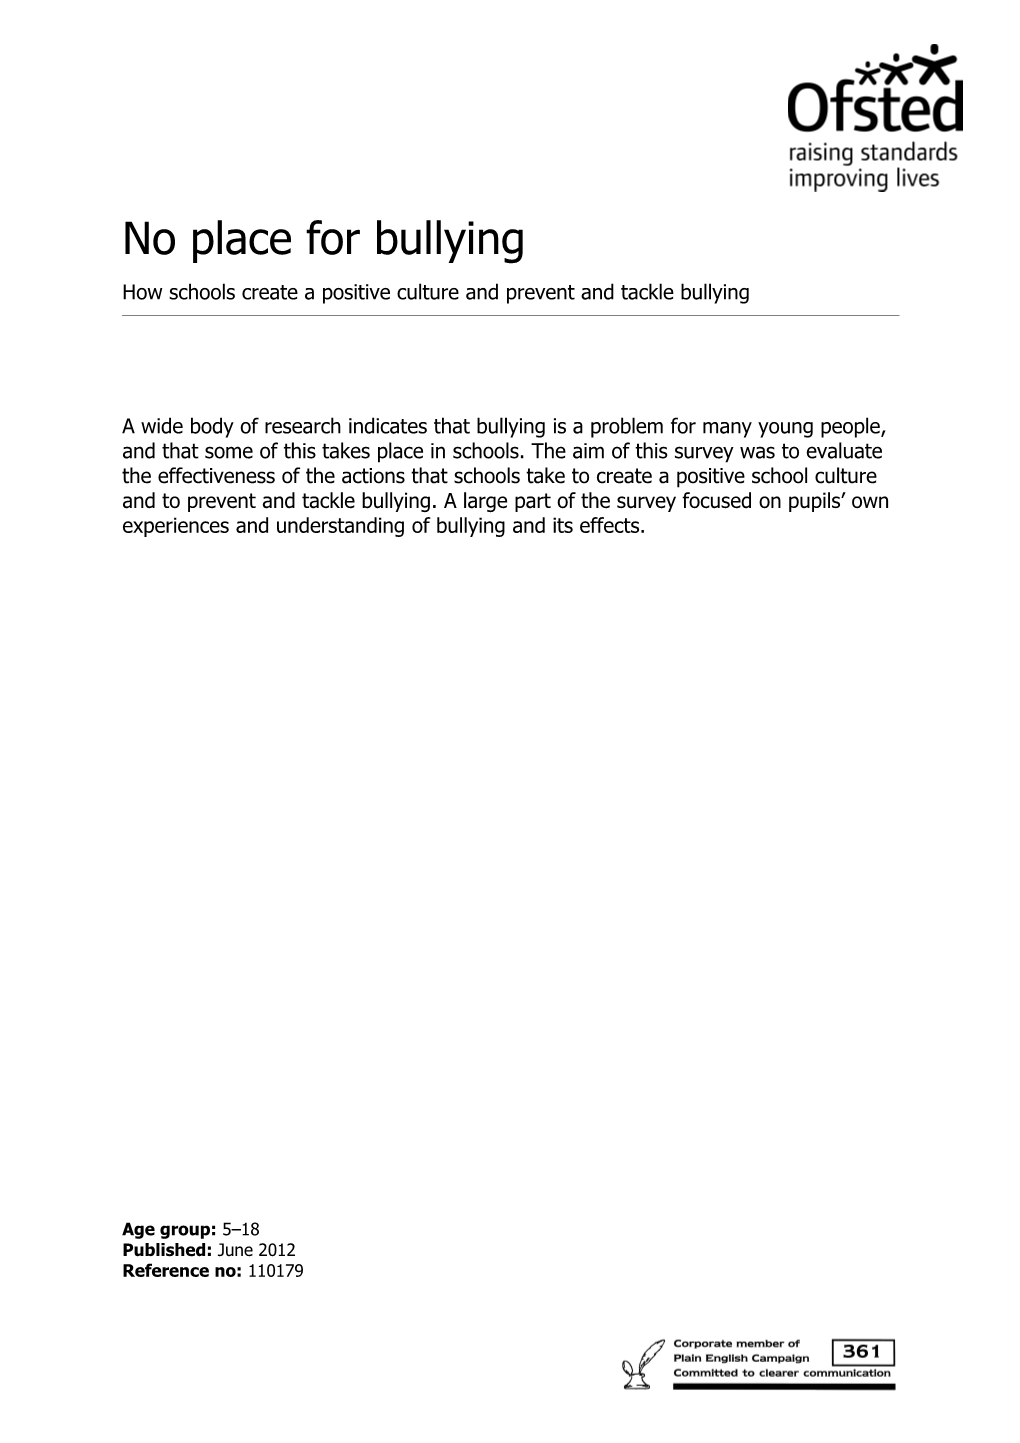 How Schools Create a Positive Culture and Prevent and Tackle Bullying